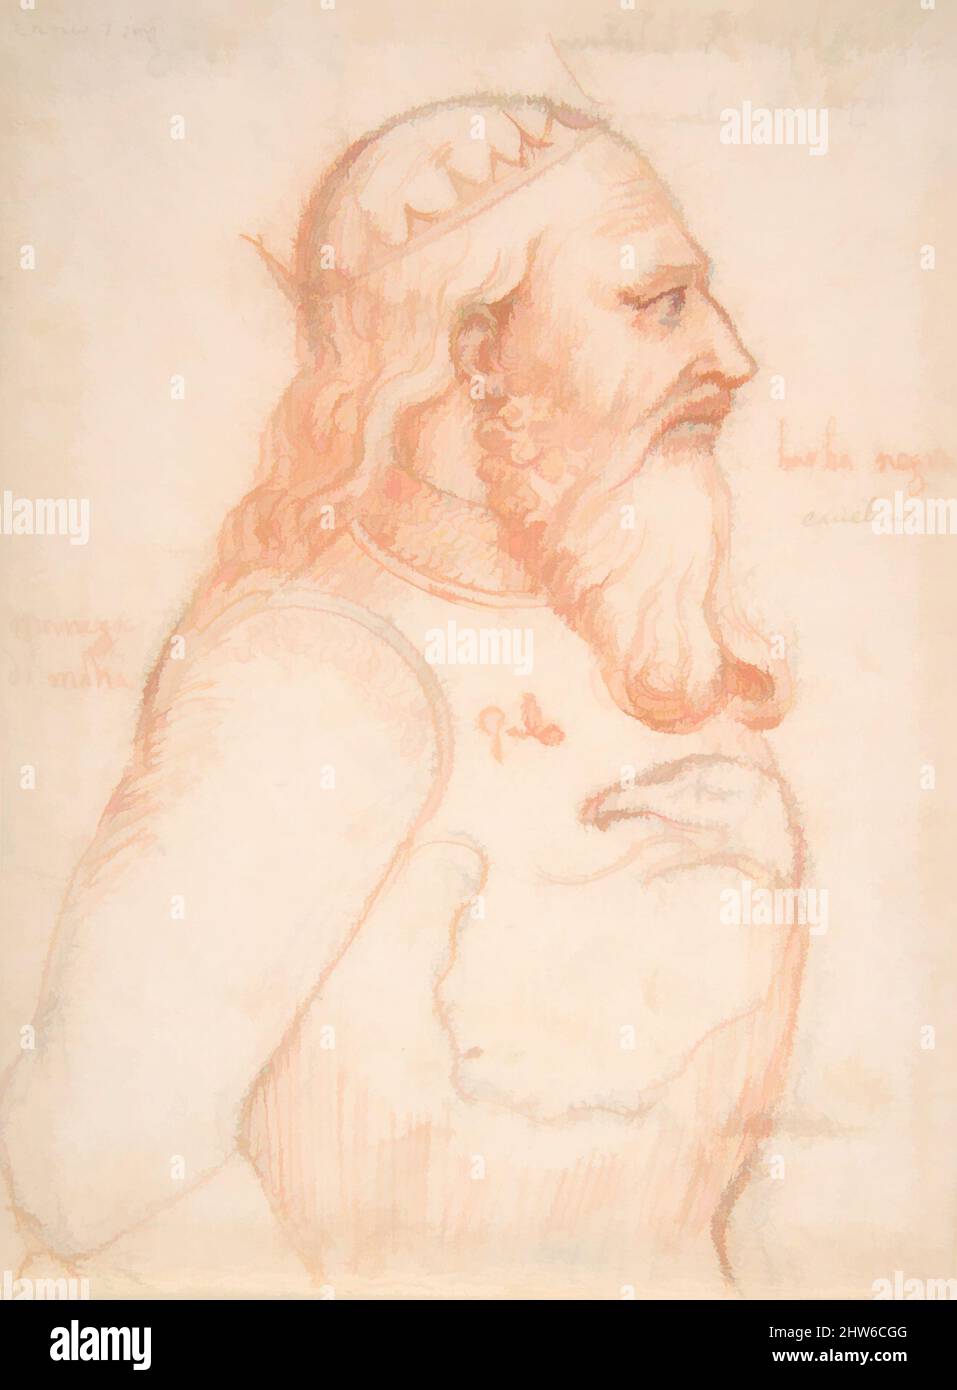 Art inspired by Portrait of Henry VII, 16th century, Red and black chalk, sheet: 7 1/8 x 5 3/8 in. (18.1 x 13.6 cm), Drawings, Anonymous, Italian, 16th century, Classic works modernized by Artotop with a splash of modernity. Shapes, color and value, eye-catching visual impact on art. Emotions through freedom of artworks in a contemporary way. A timeless message pursuing a wildly creative new direction. Artists turning to the digital medium and creating the Artotop NFT Stock Photo